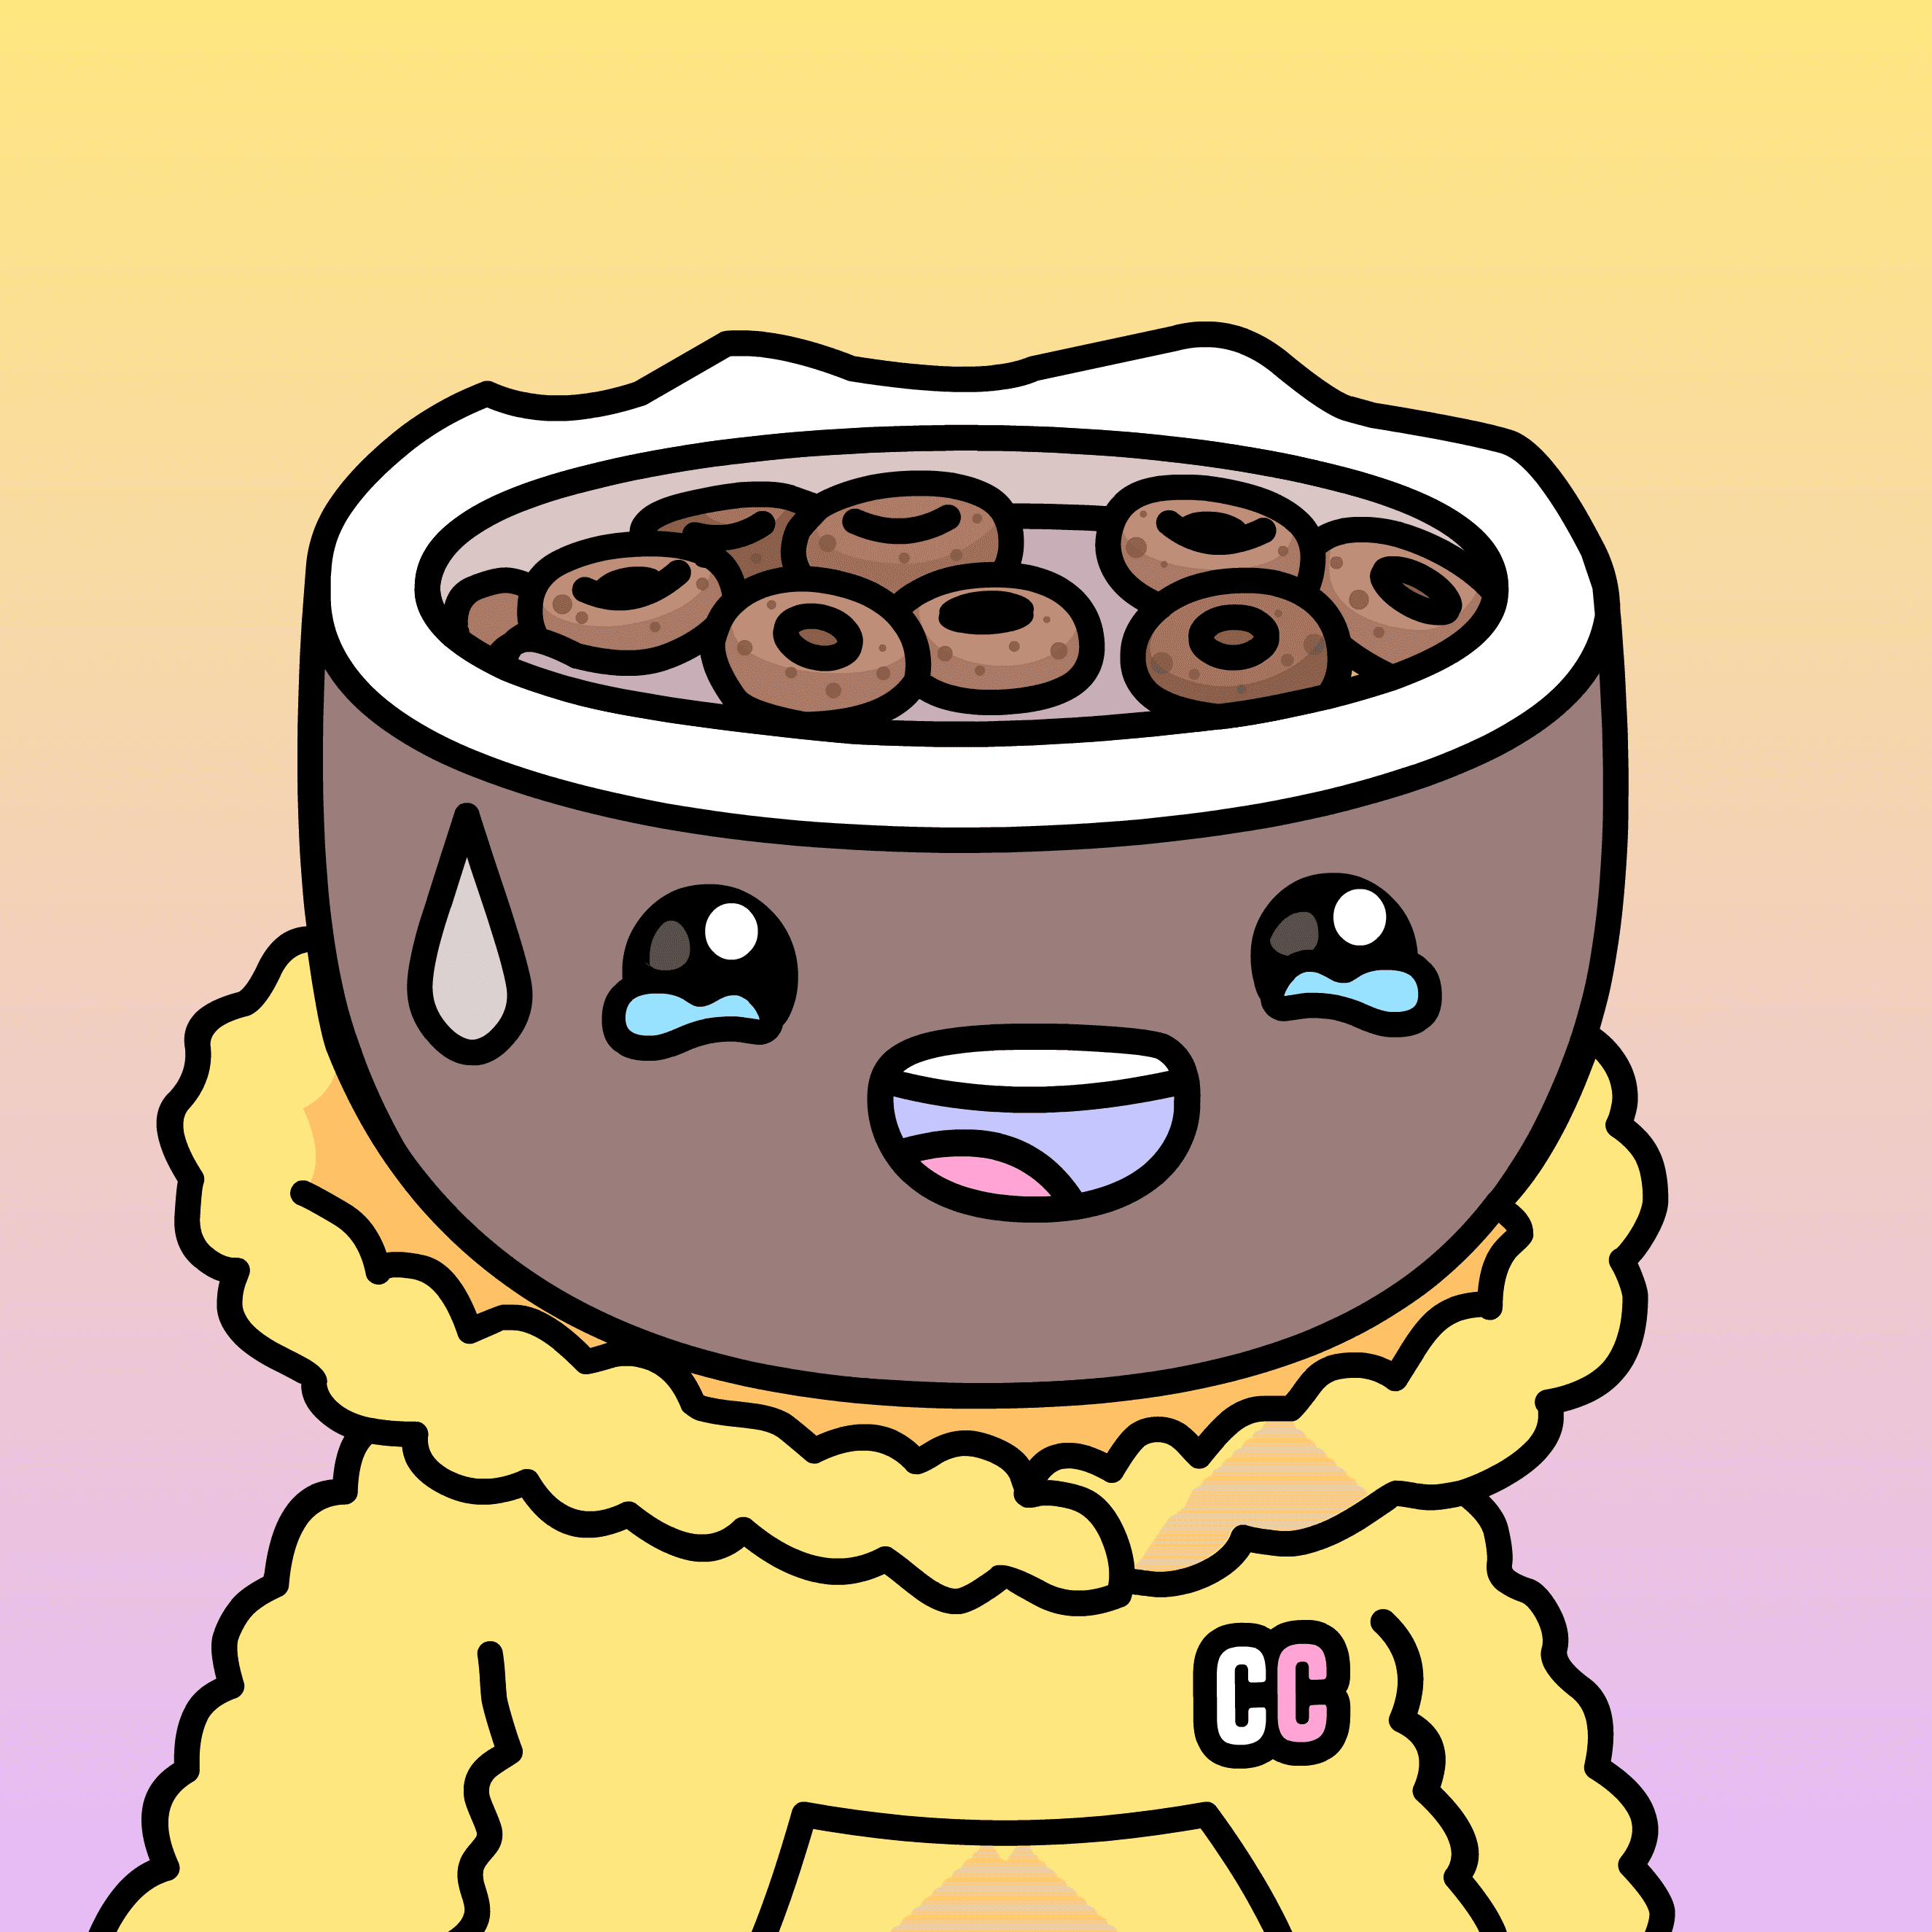 CEREAL #8399